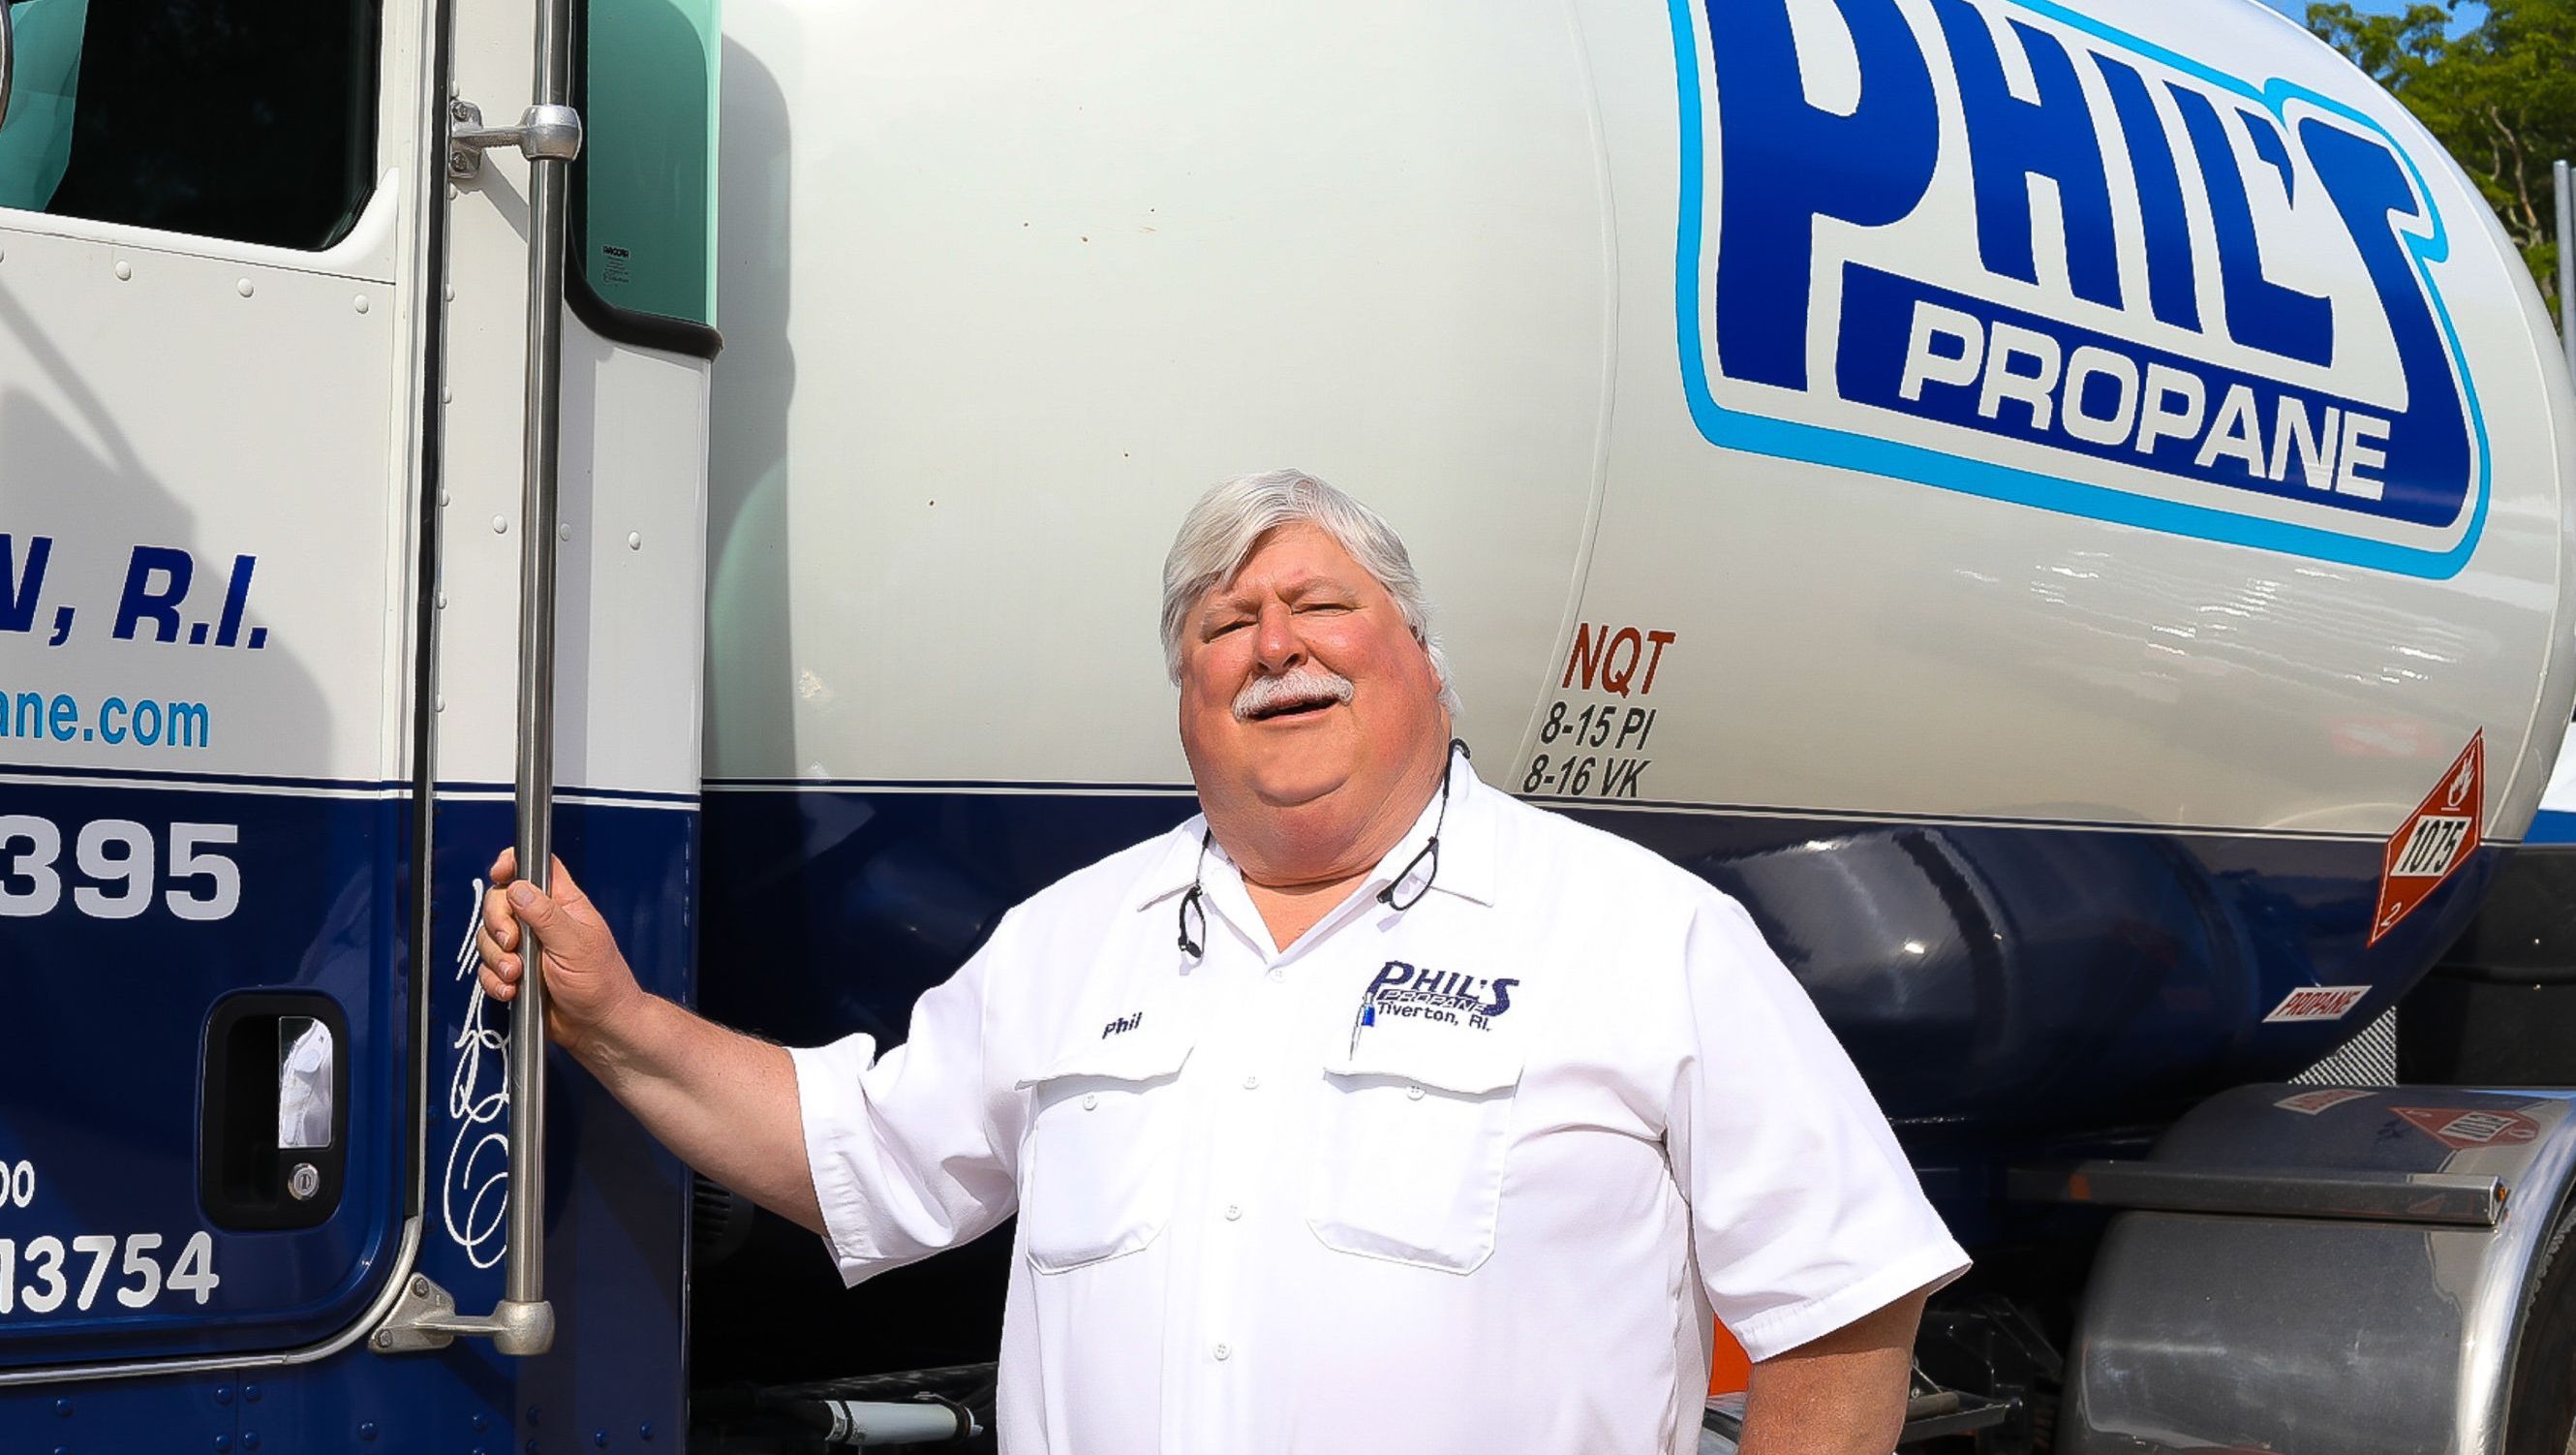 Phil's Propane employee and propane delivery truck